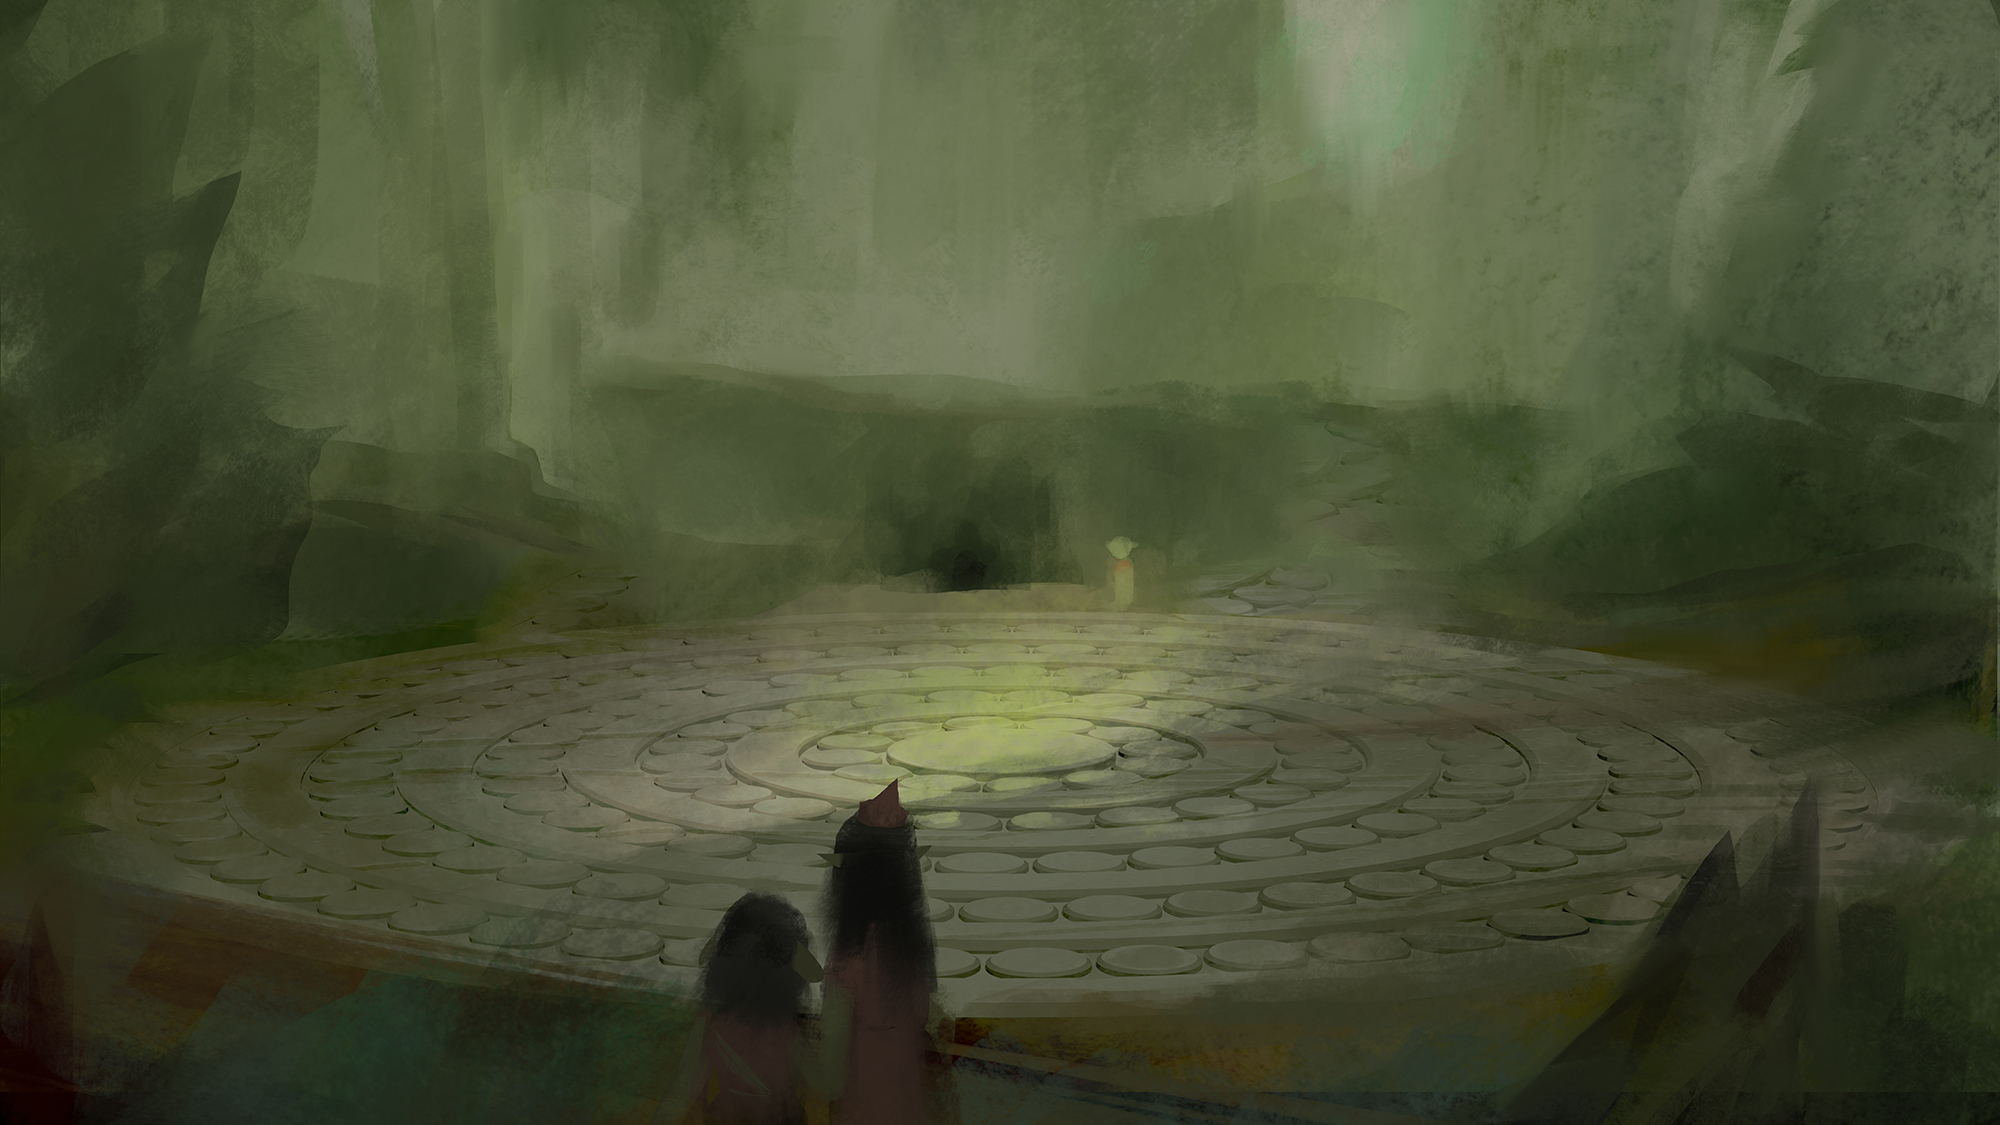 two characters look across a round dial on the ground towards a small goblin across from them